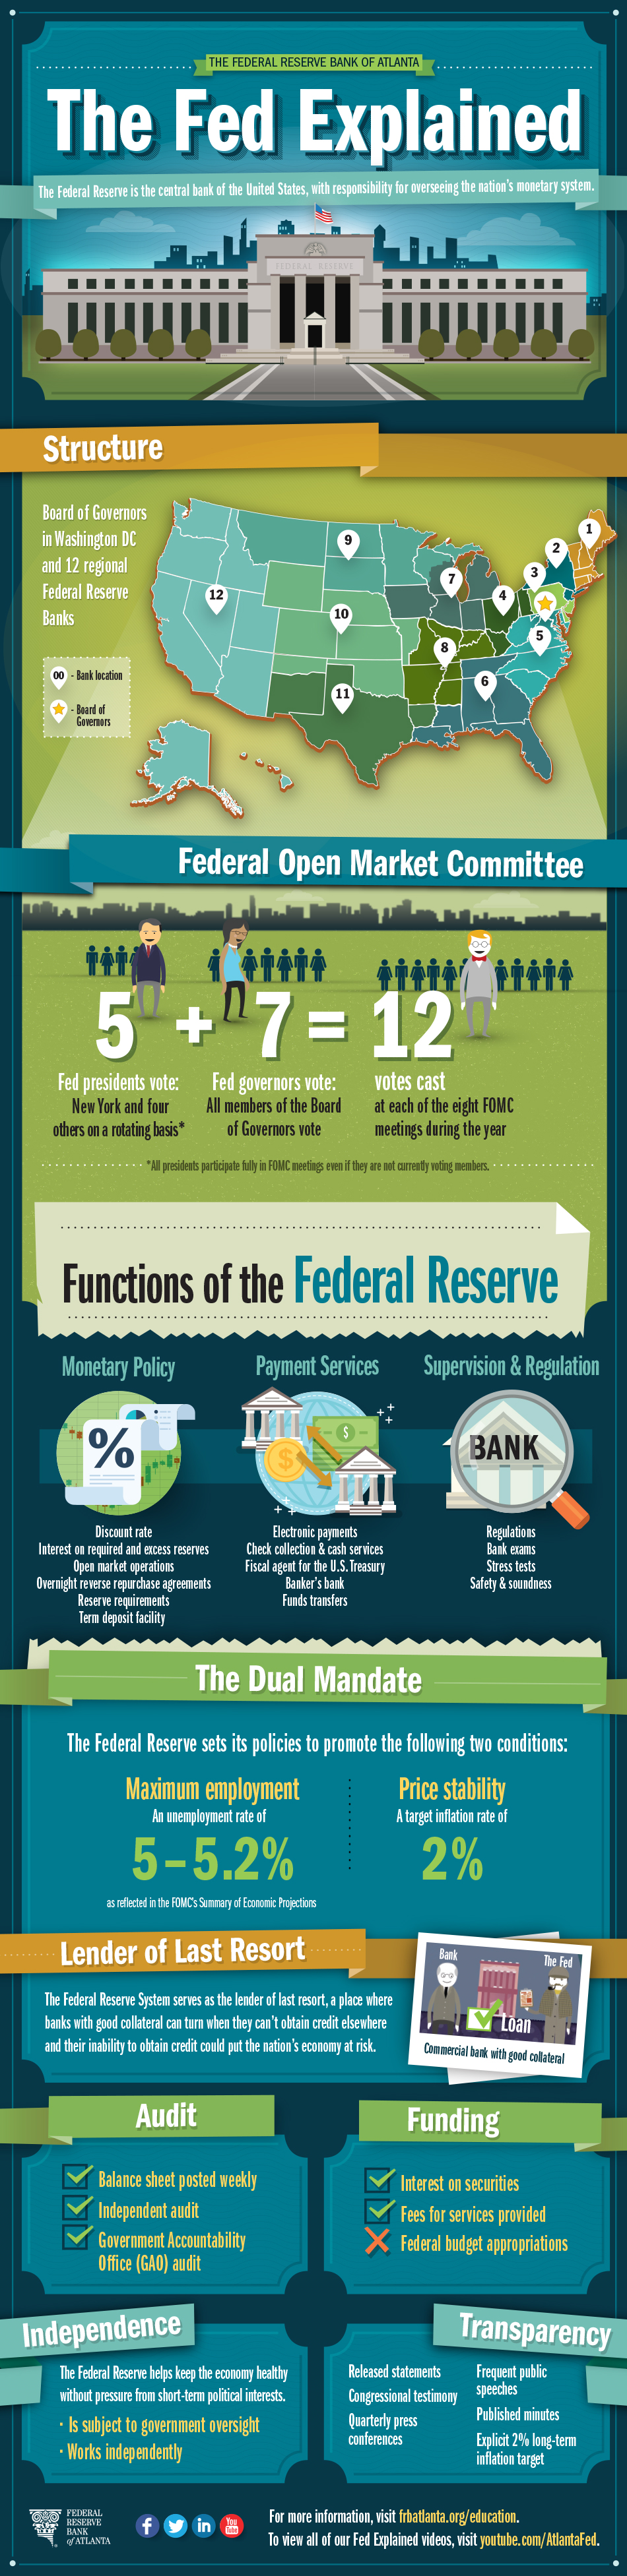 infographic for The Fed Explained